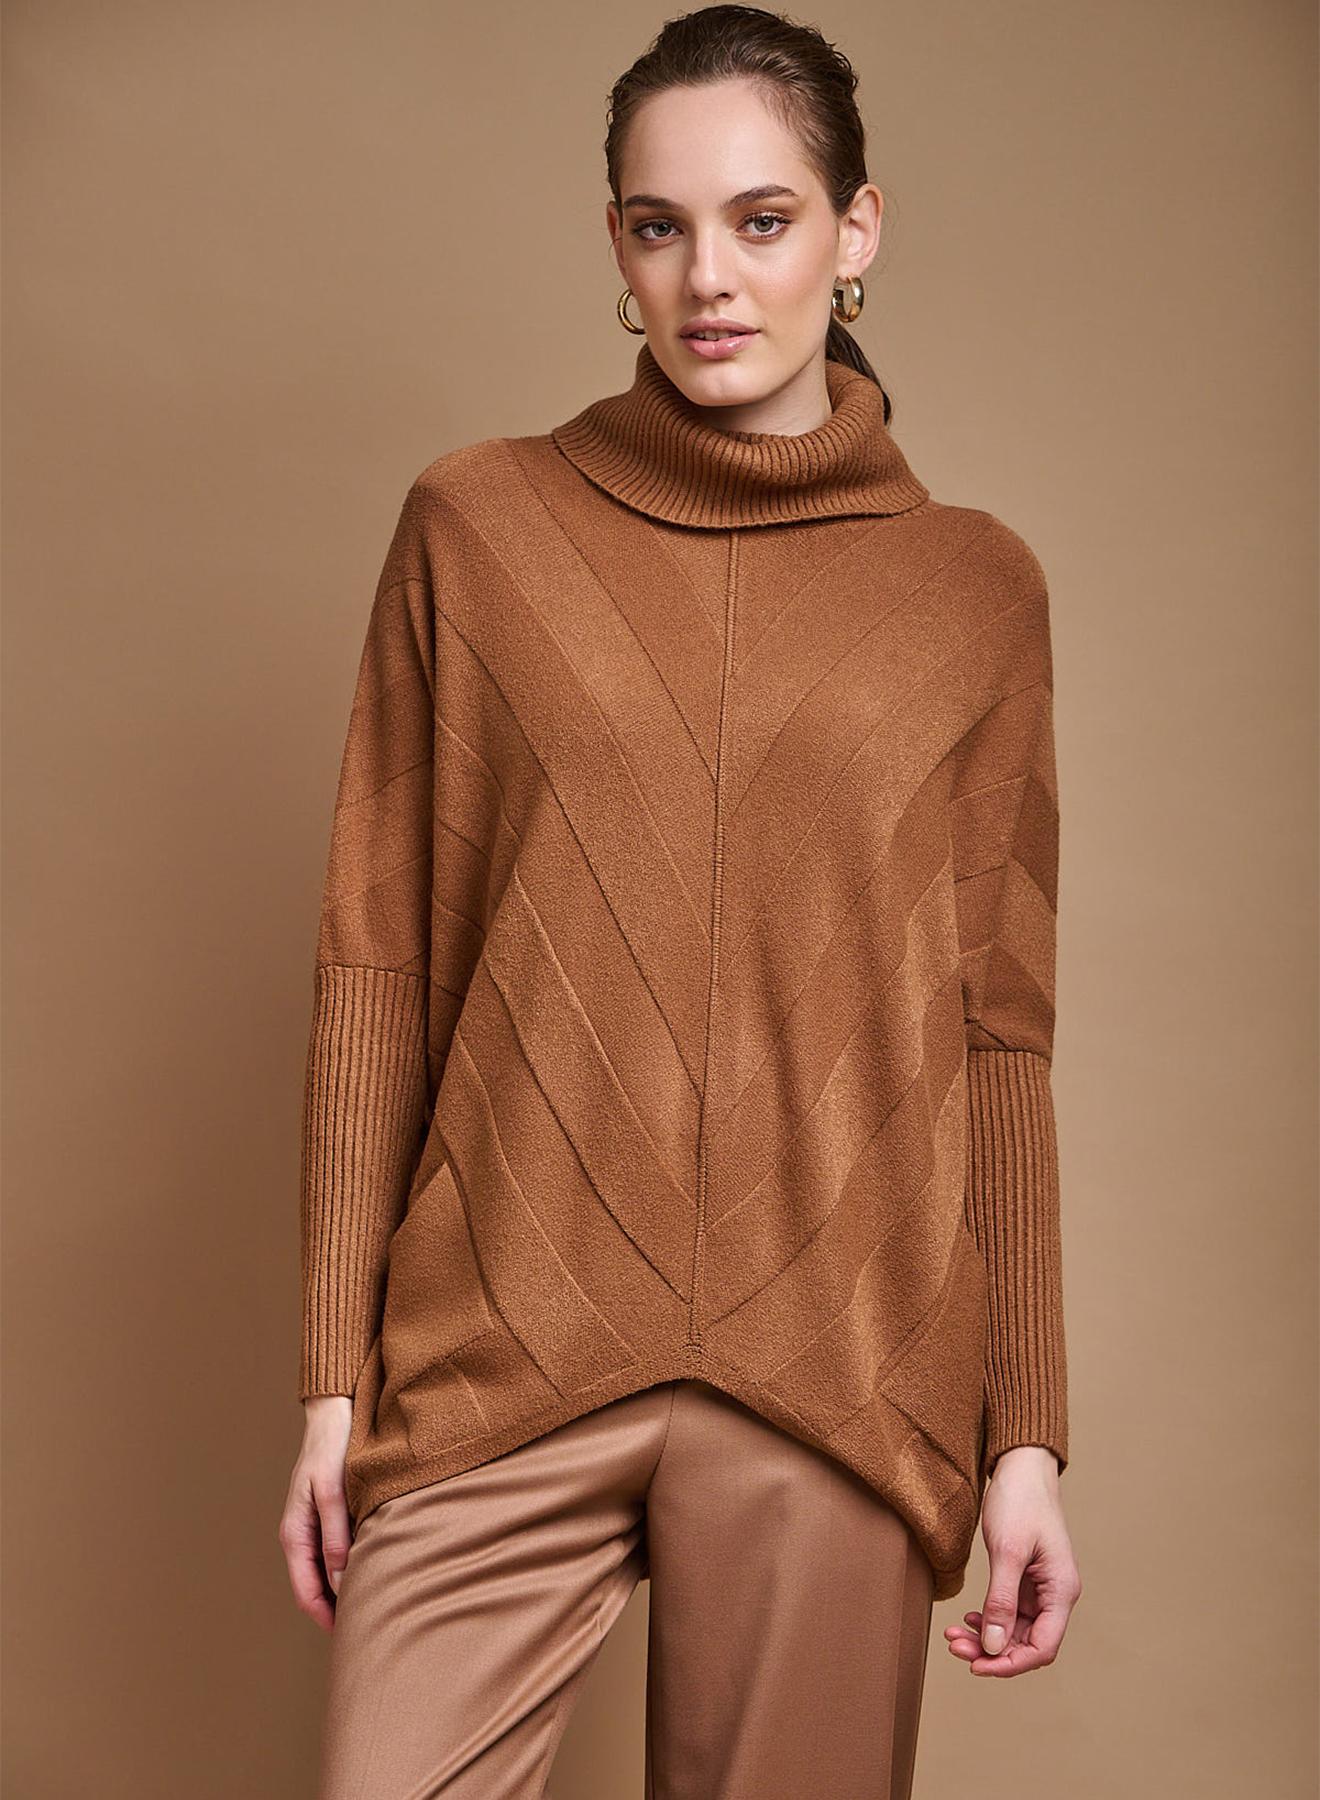 Oversized turtleneck sweater with textured details and pockets - 2